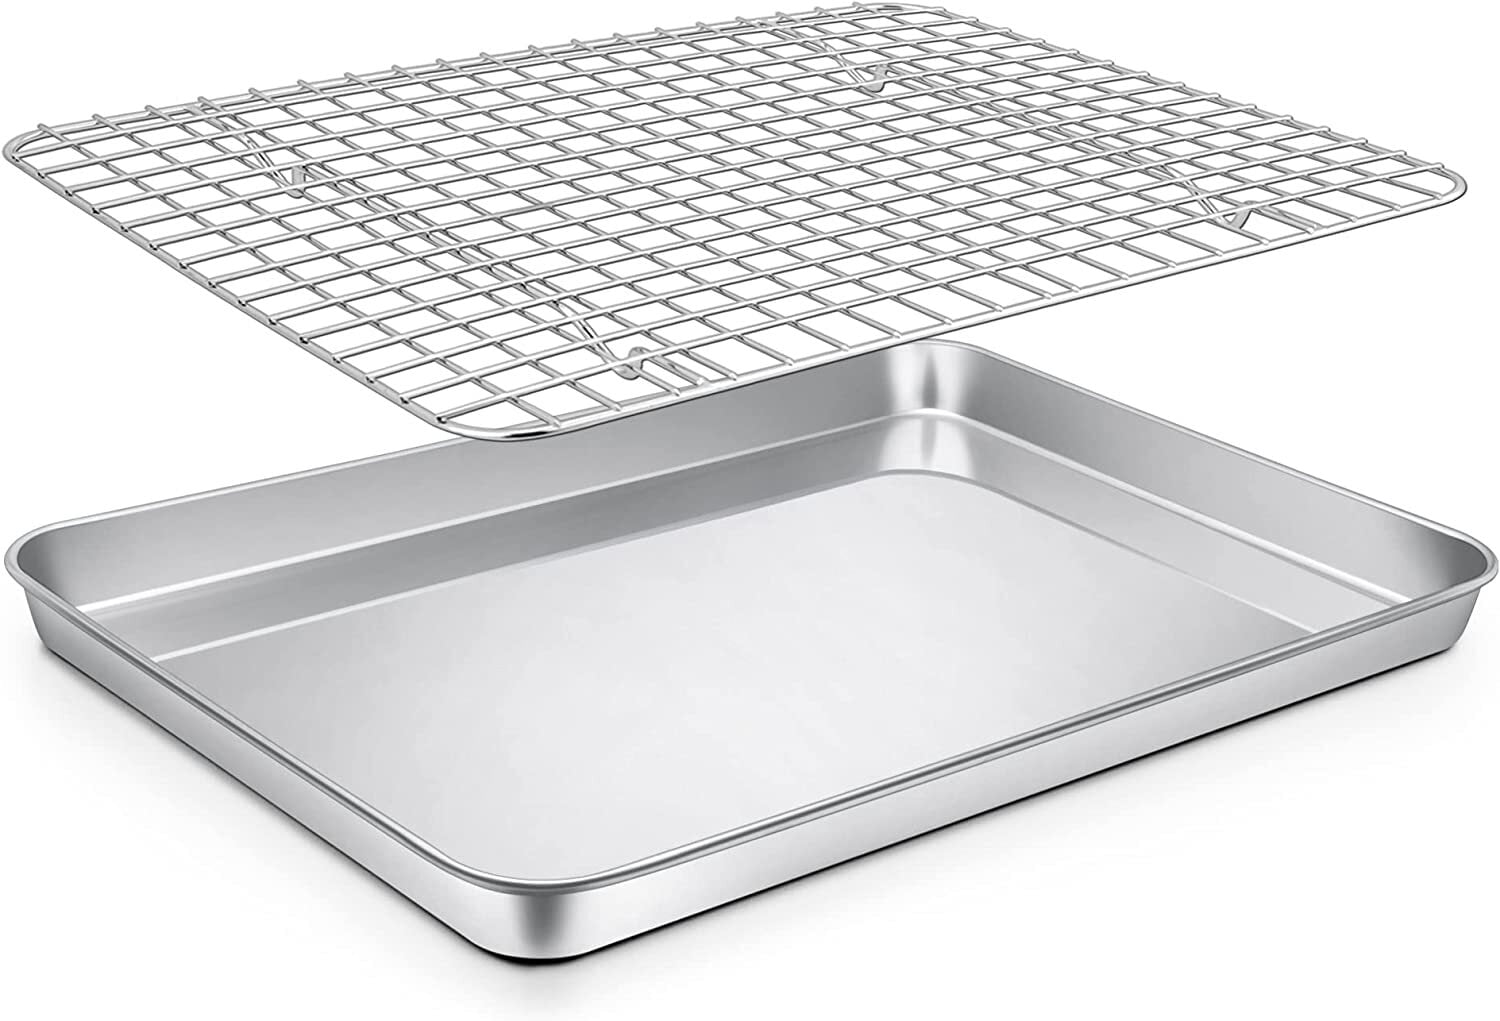 Quarter Sheet Pan with Wire Rack Set [2 Baking Sheets + 2 Cooling